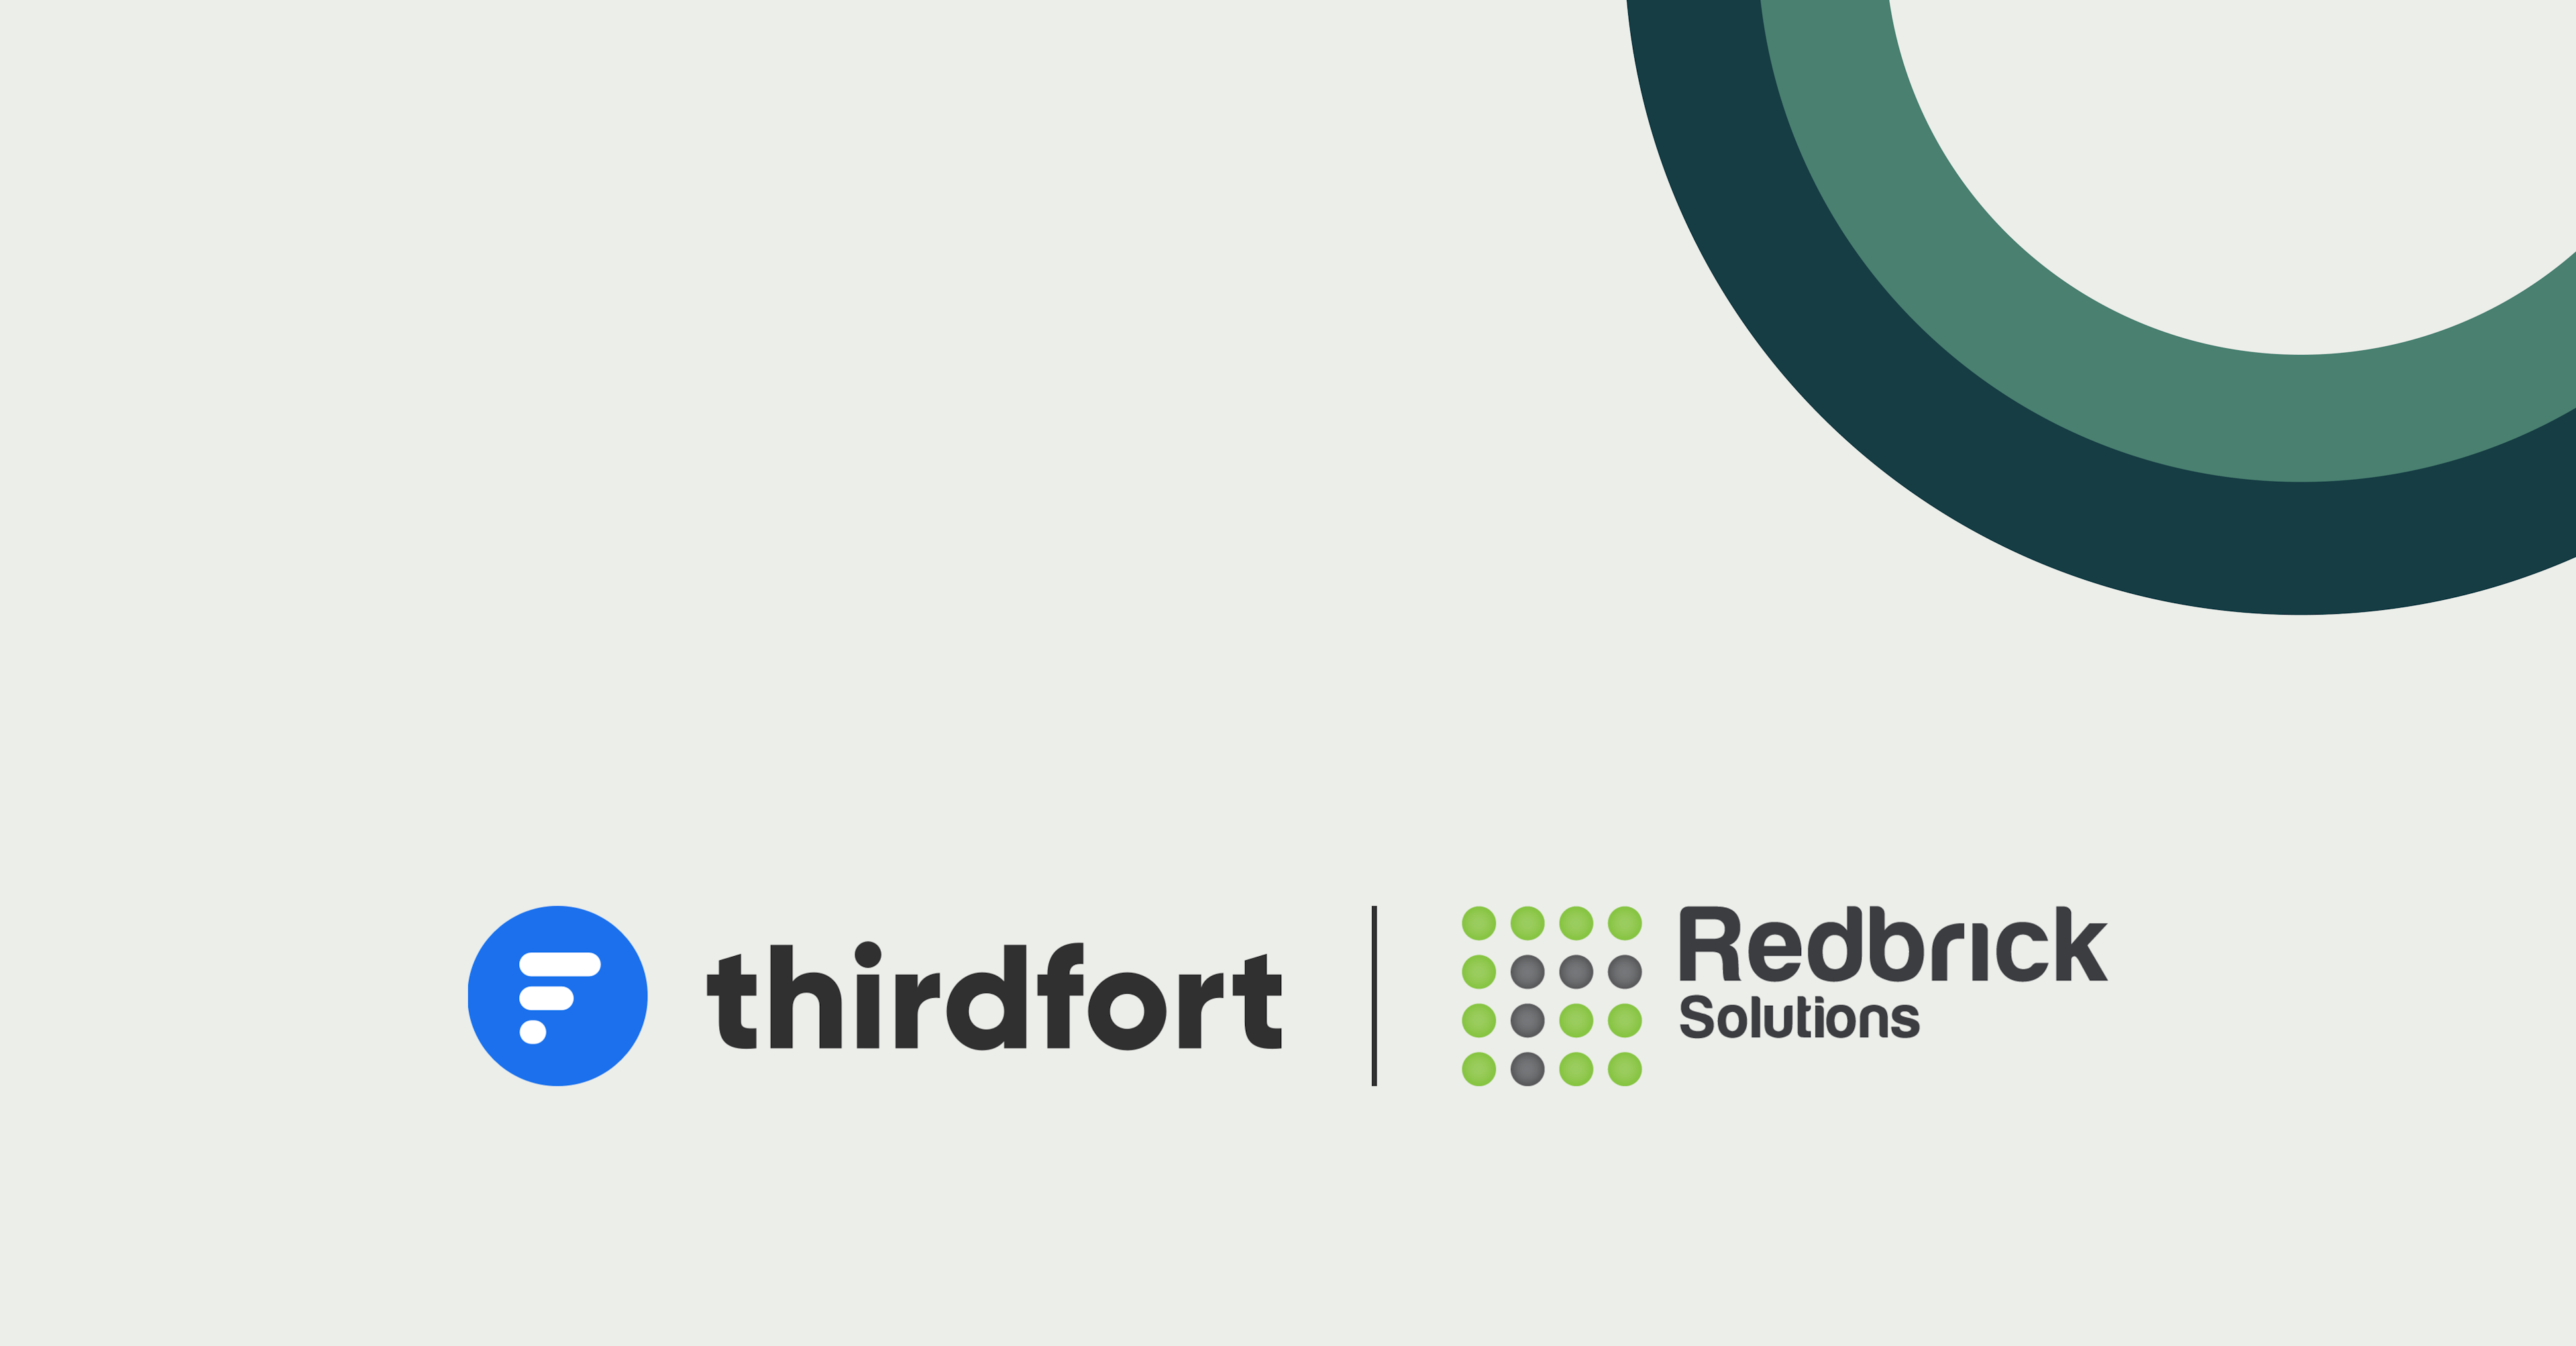 Thirdfort logo and Redbrick solutions logo on a grey background with a green graphic circle in the top right